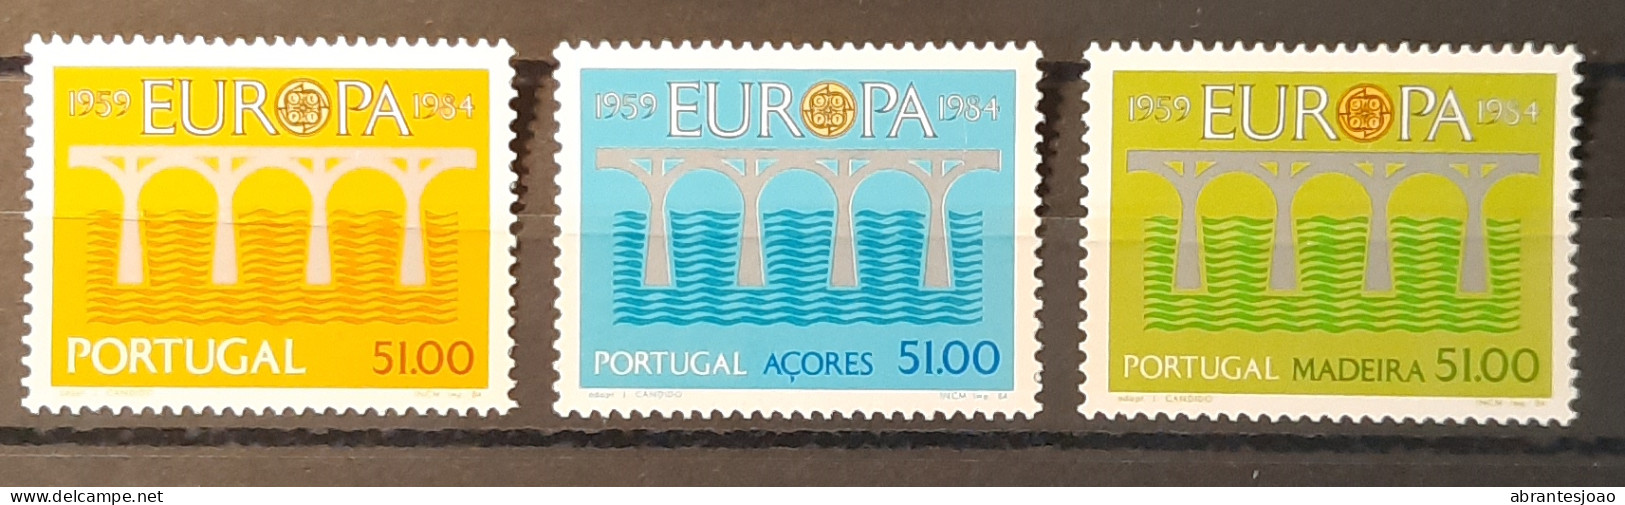 1984 - Portugal - EUROPA CEPT 25 Years - Continent + Azores + Madeira - MNH - 1+1+1 Stamps - Neufs